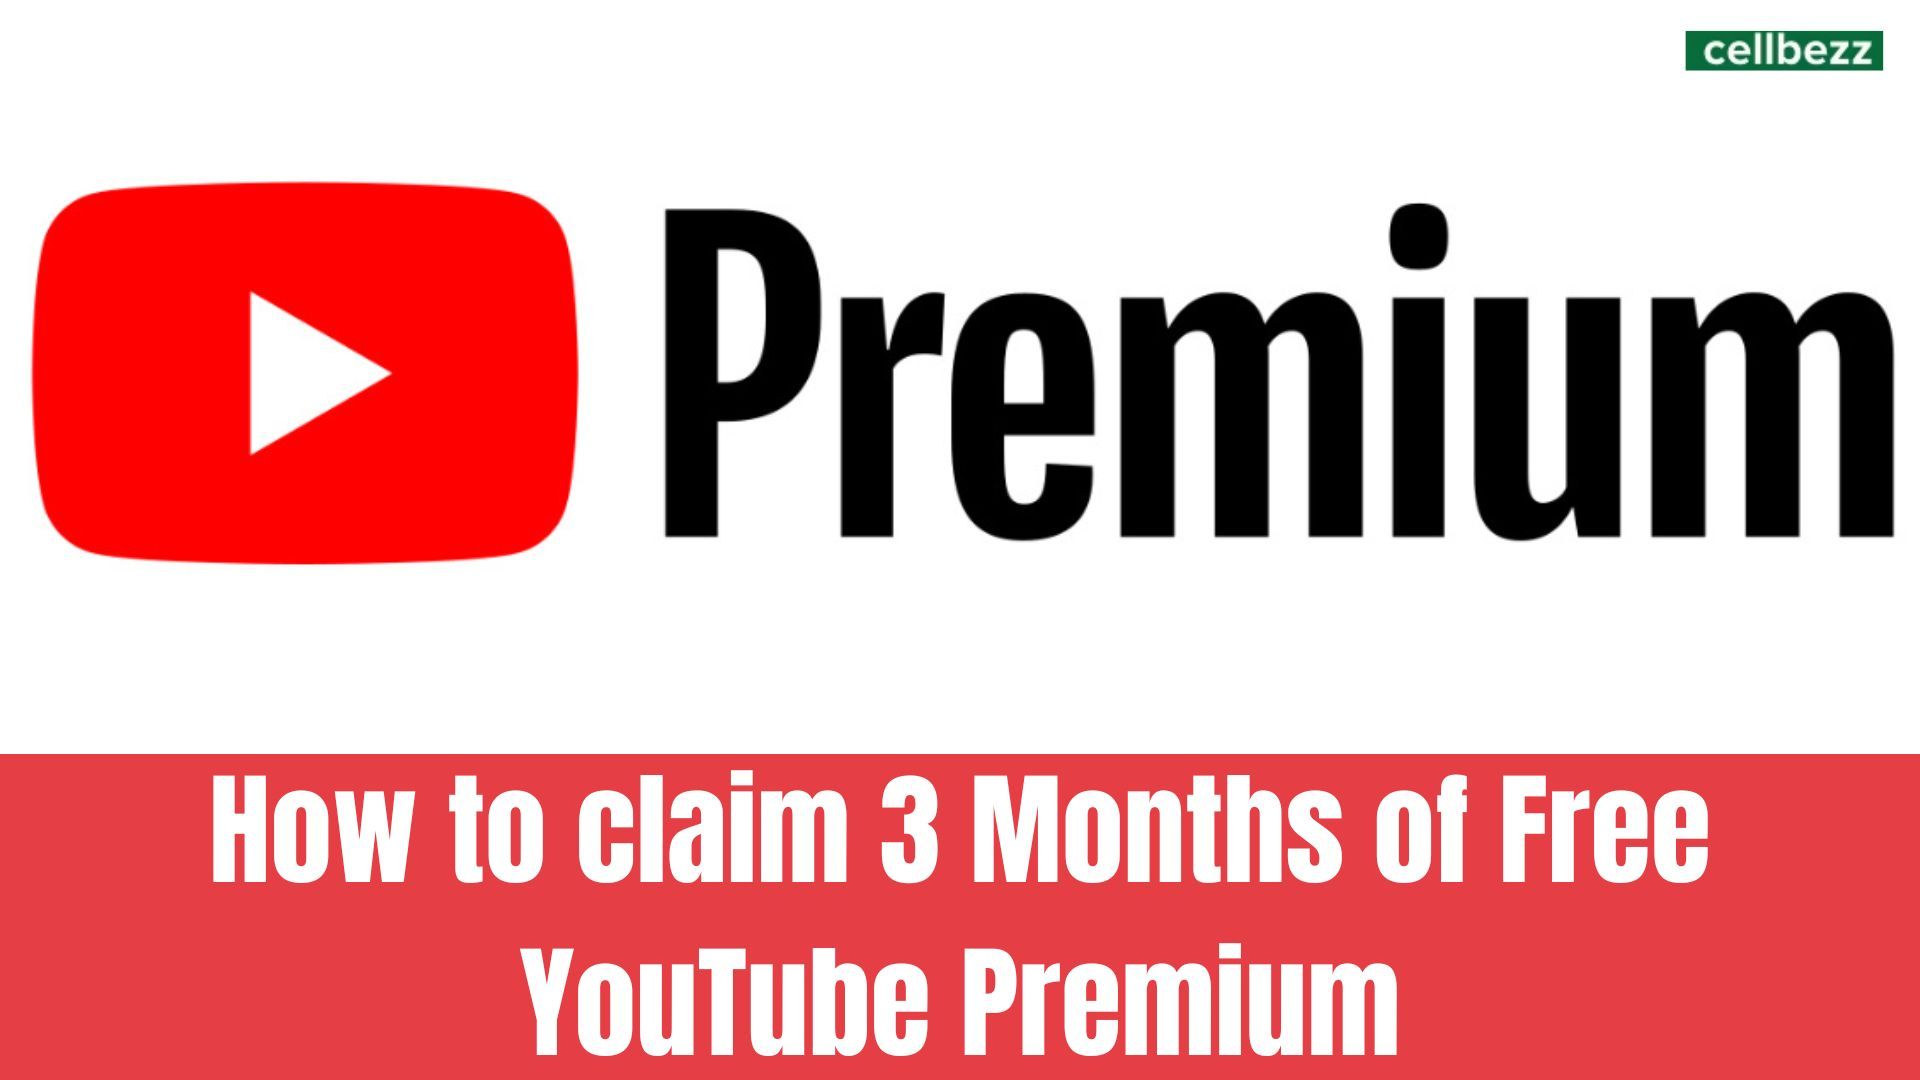 How To Claim 3 Months Of Free YouTube Premium PCbezz